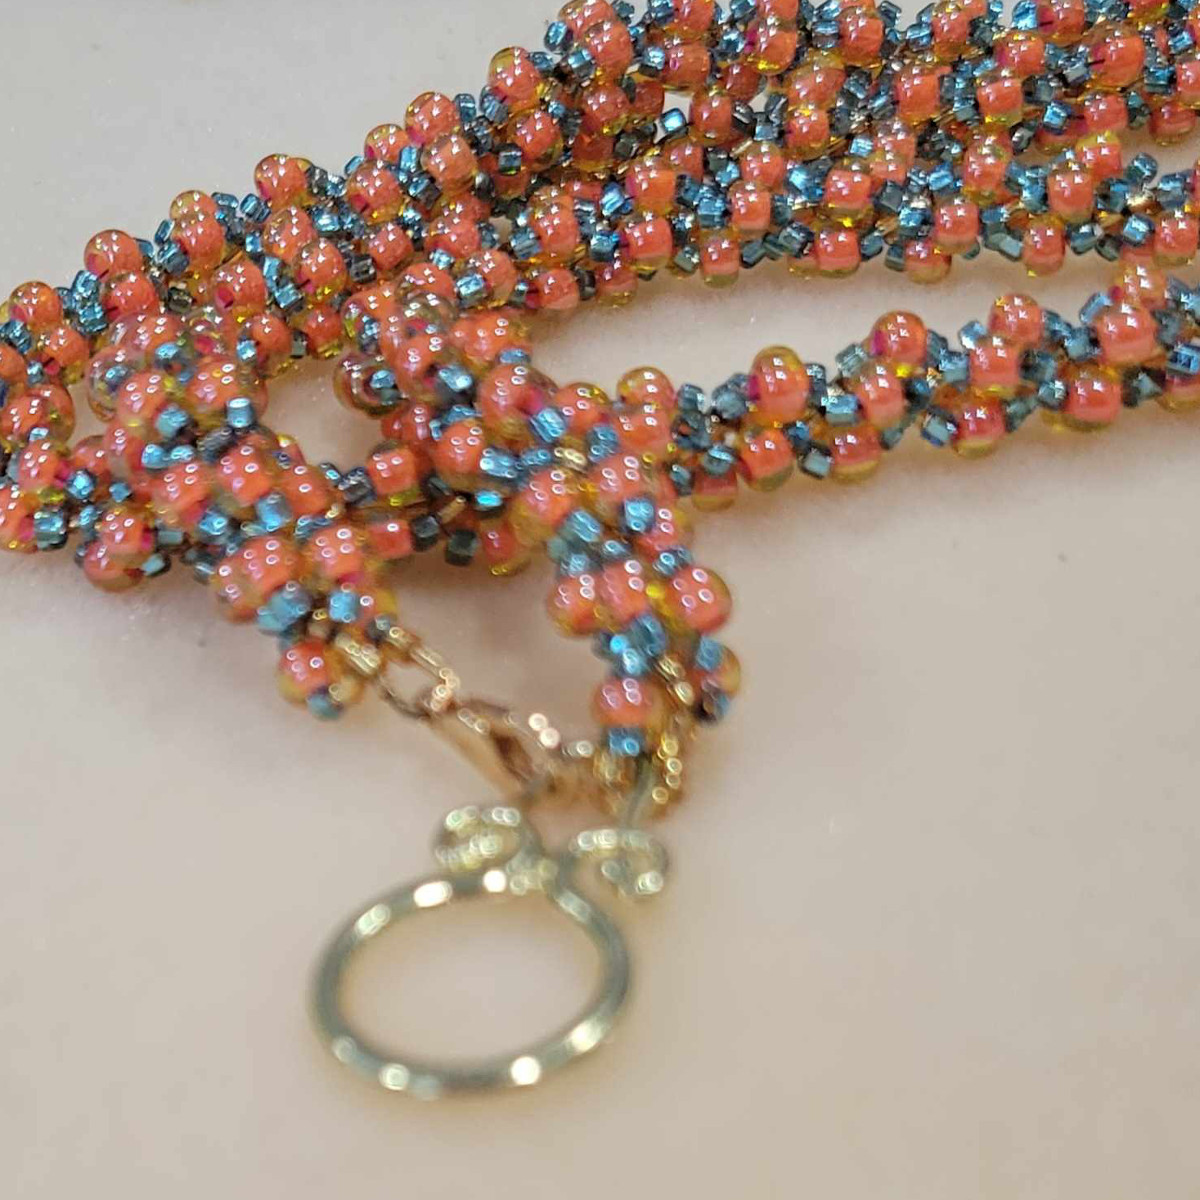 Beaded lanyard by Amy Castine